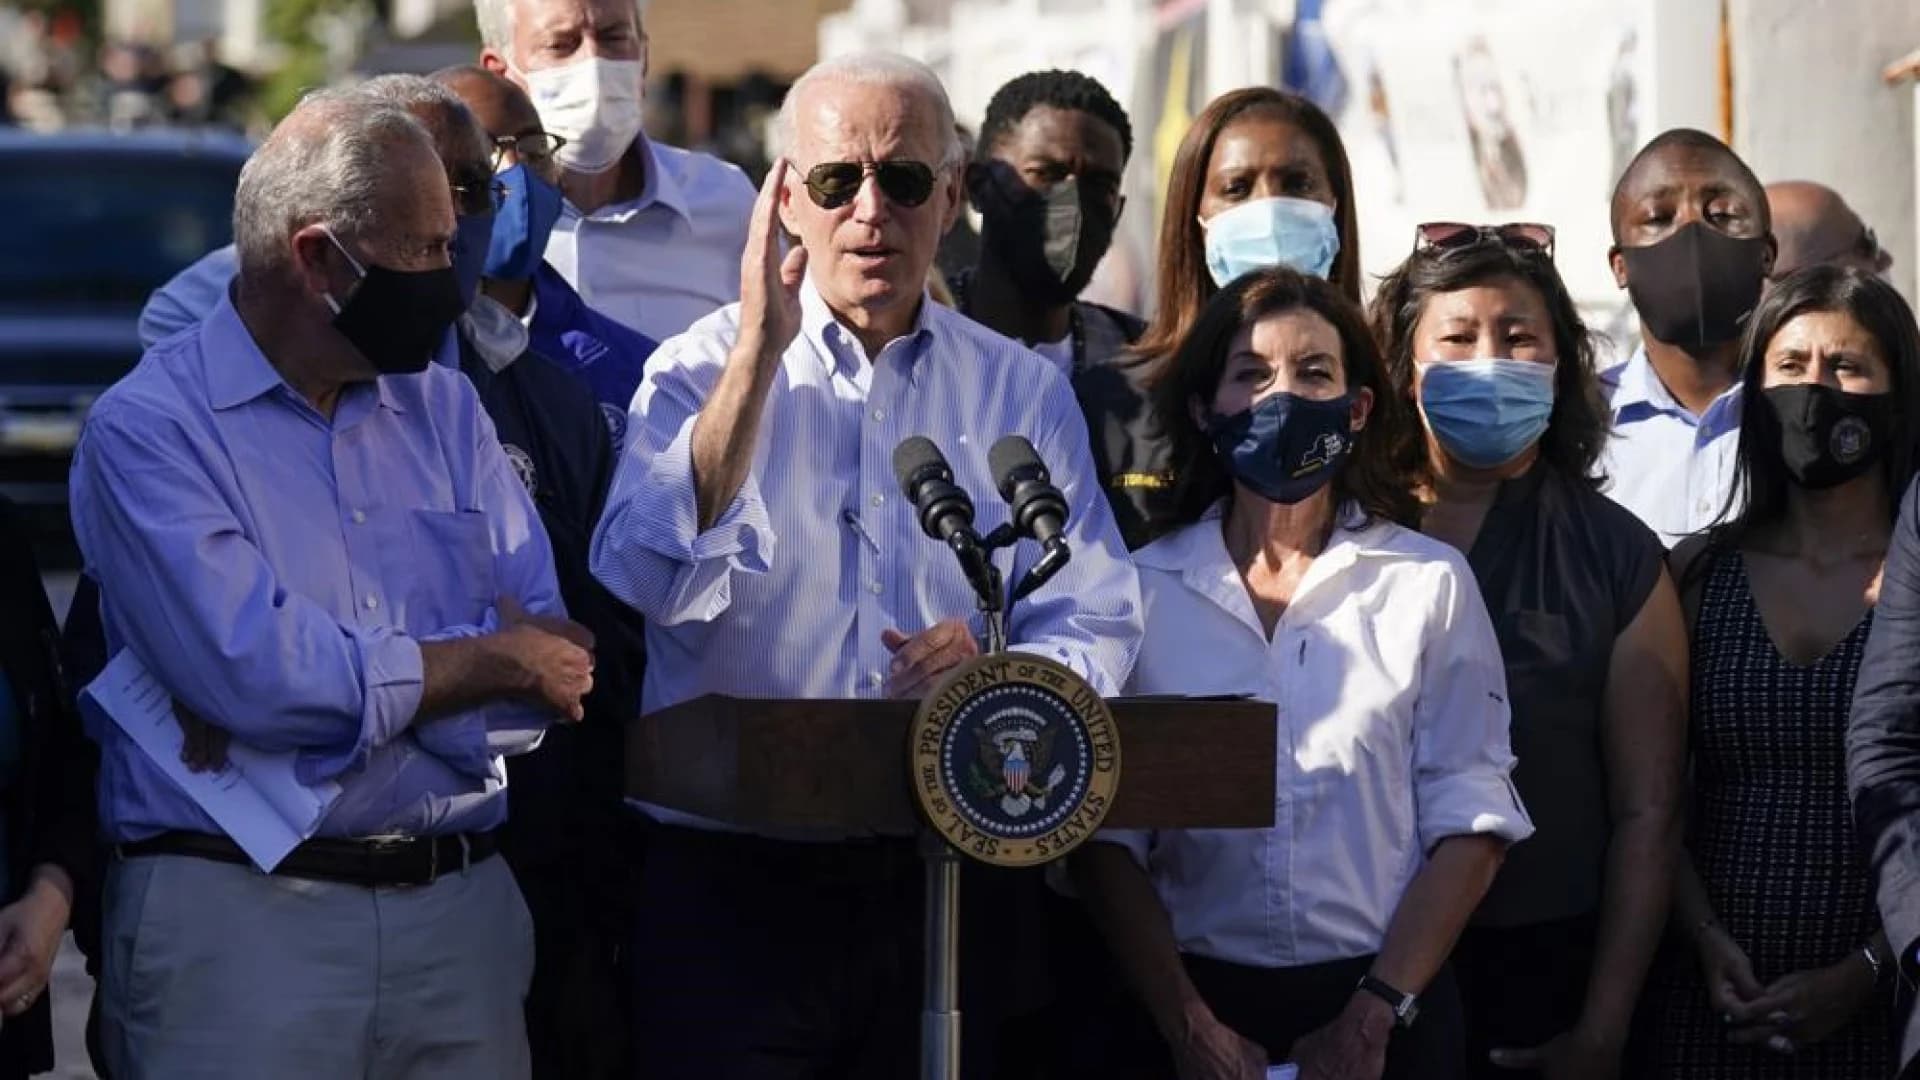 In NYC after IDA, Biden calls climate ‘everybody’s crisis’